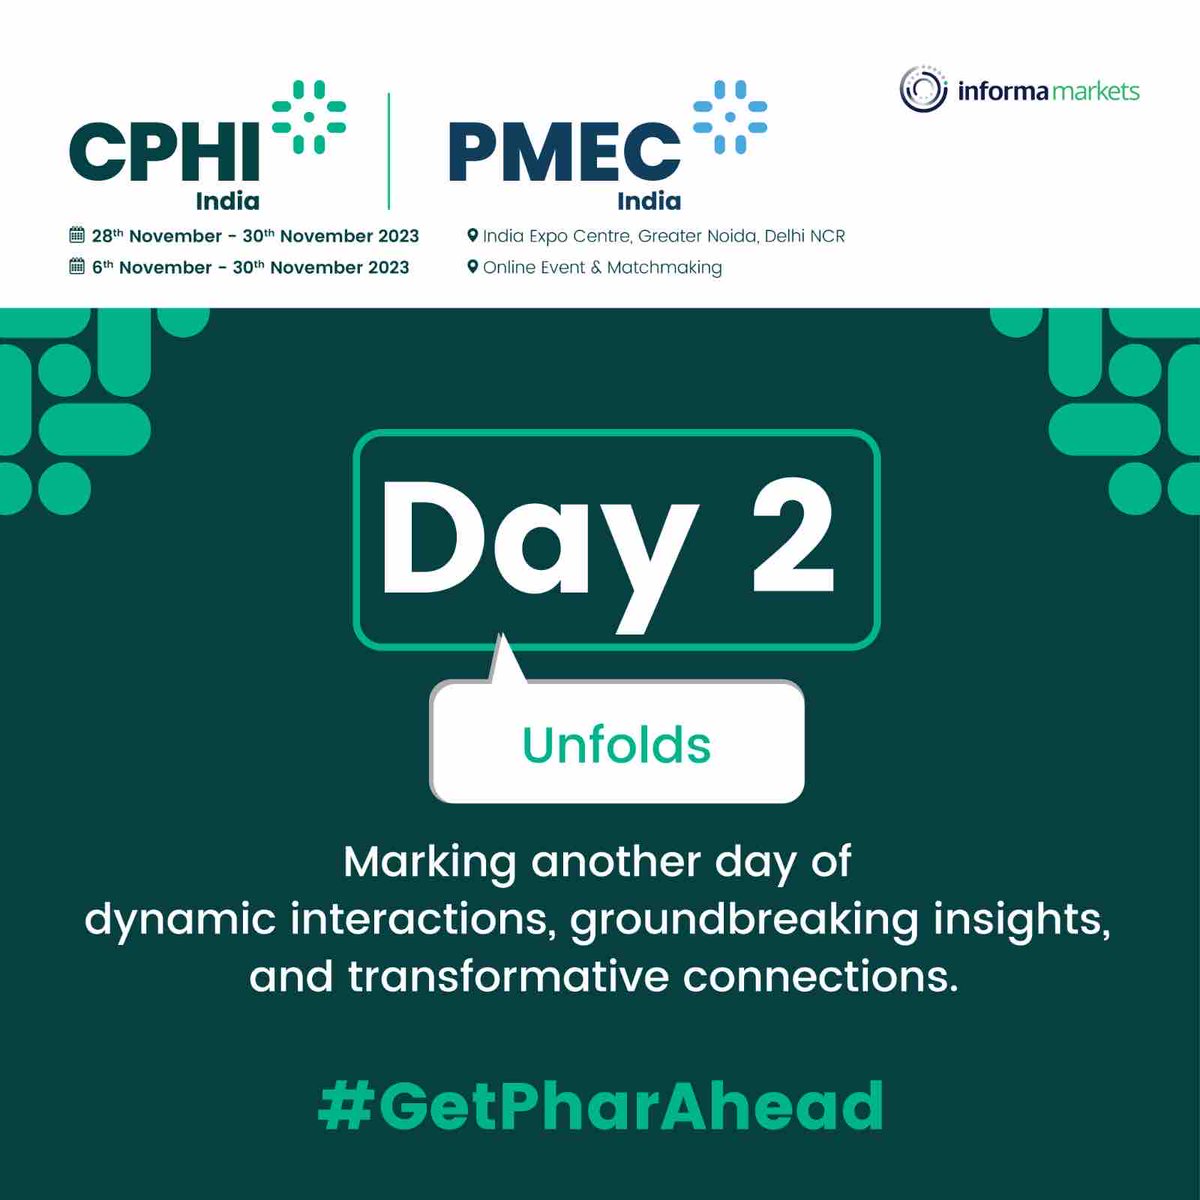 Ready to dive into the heart of pharmaceutical innovation? Let’s collectively create an extraordinary Day 2!

#CPHI2023 #PMEC2023 #PharmaIndustry #Innovation #Collaboration #GetPharAhead #CPHI #PMEC #PharmaCommunity #PharmaInnovation #DelhiNCR #Pharmavisitors #PharmaEvent